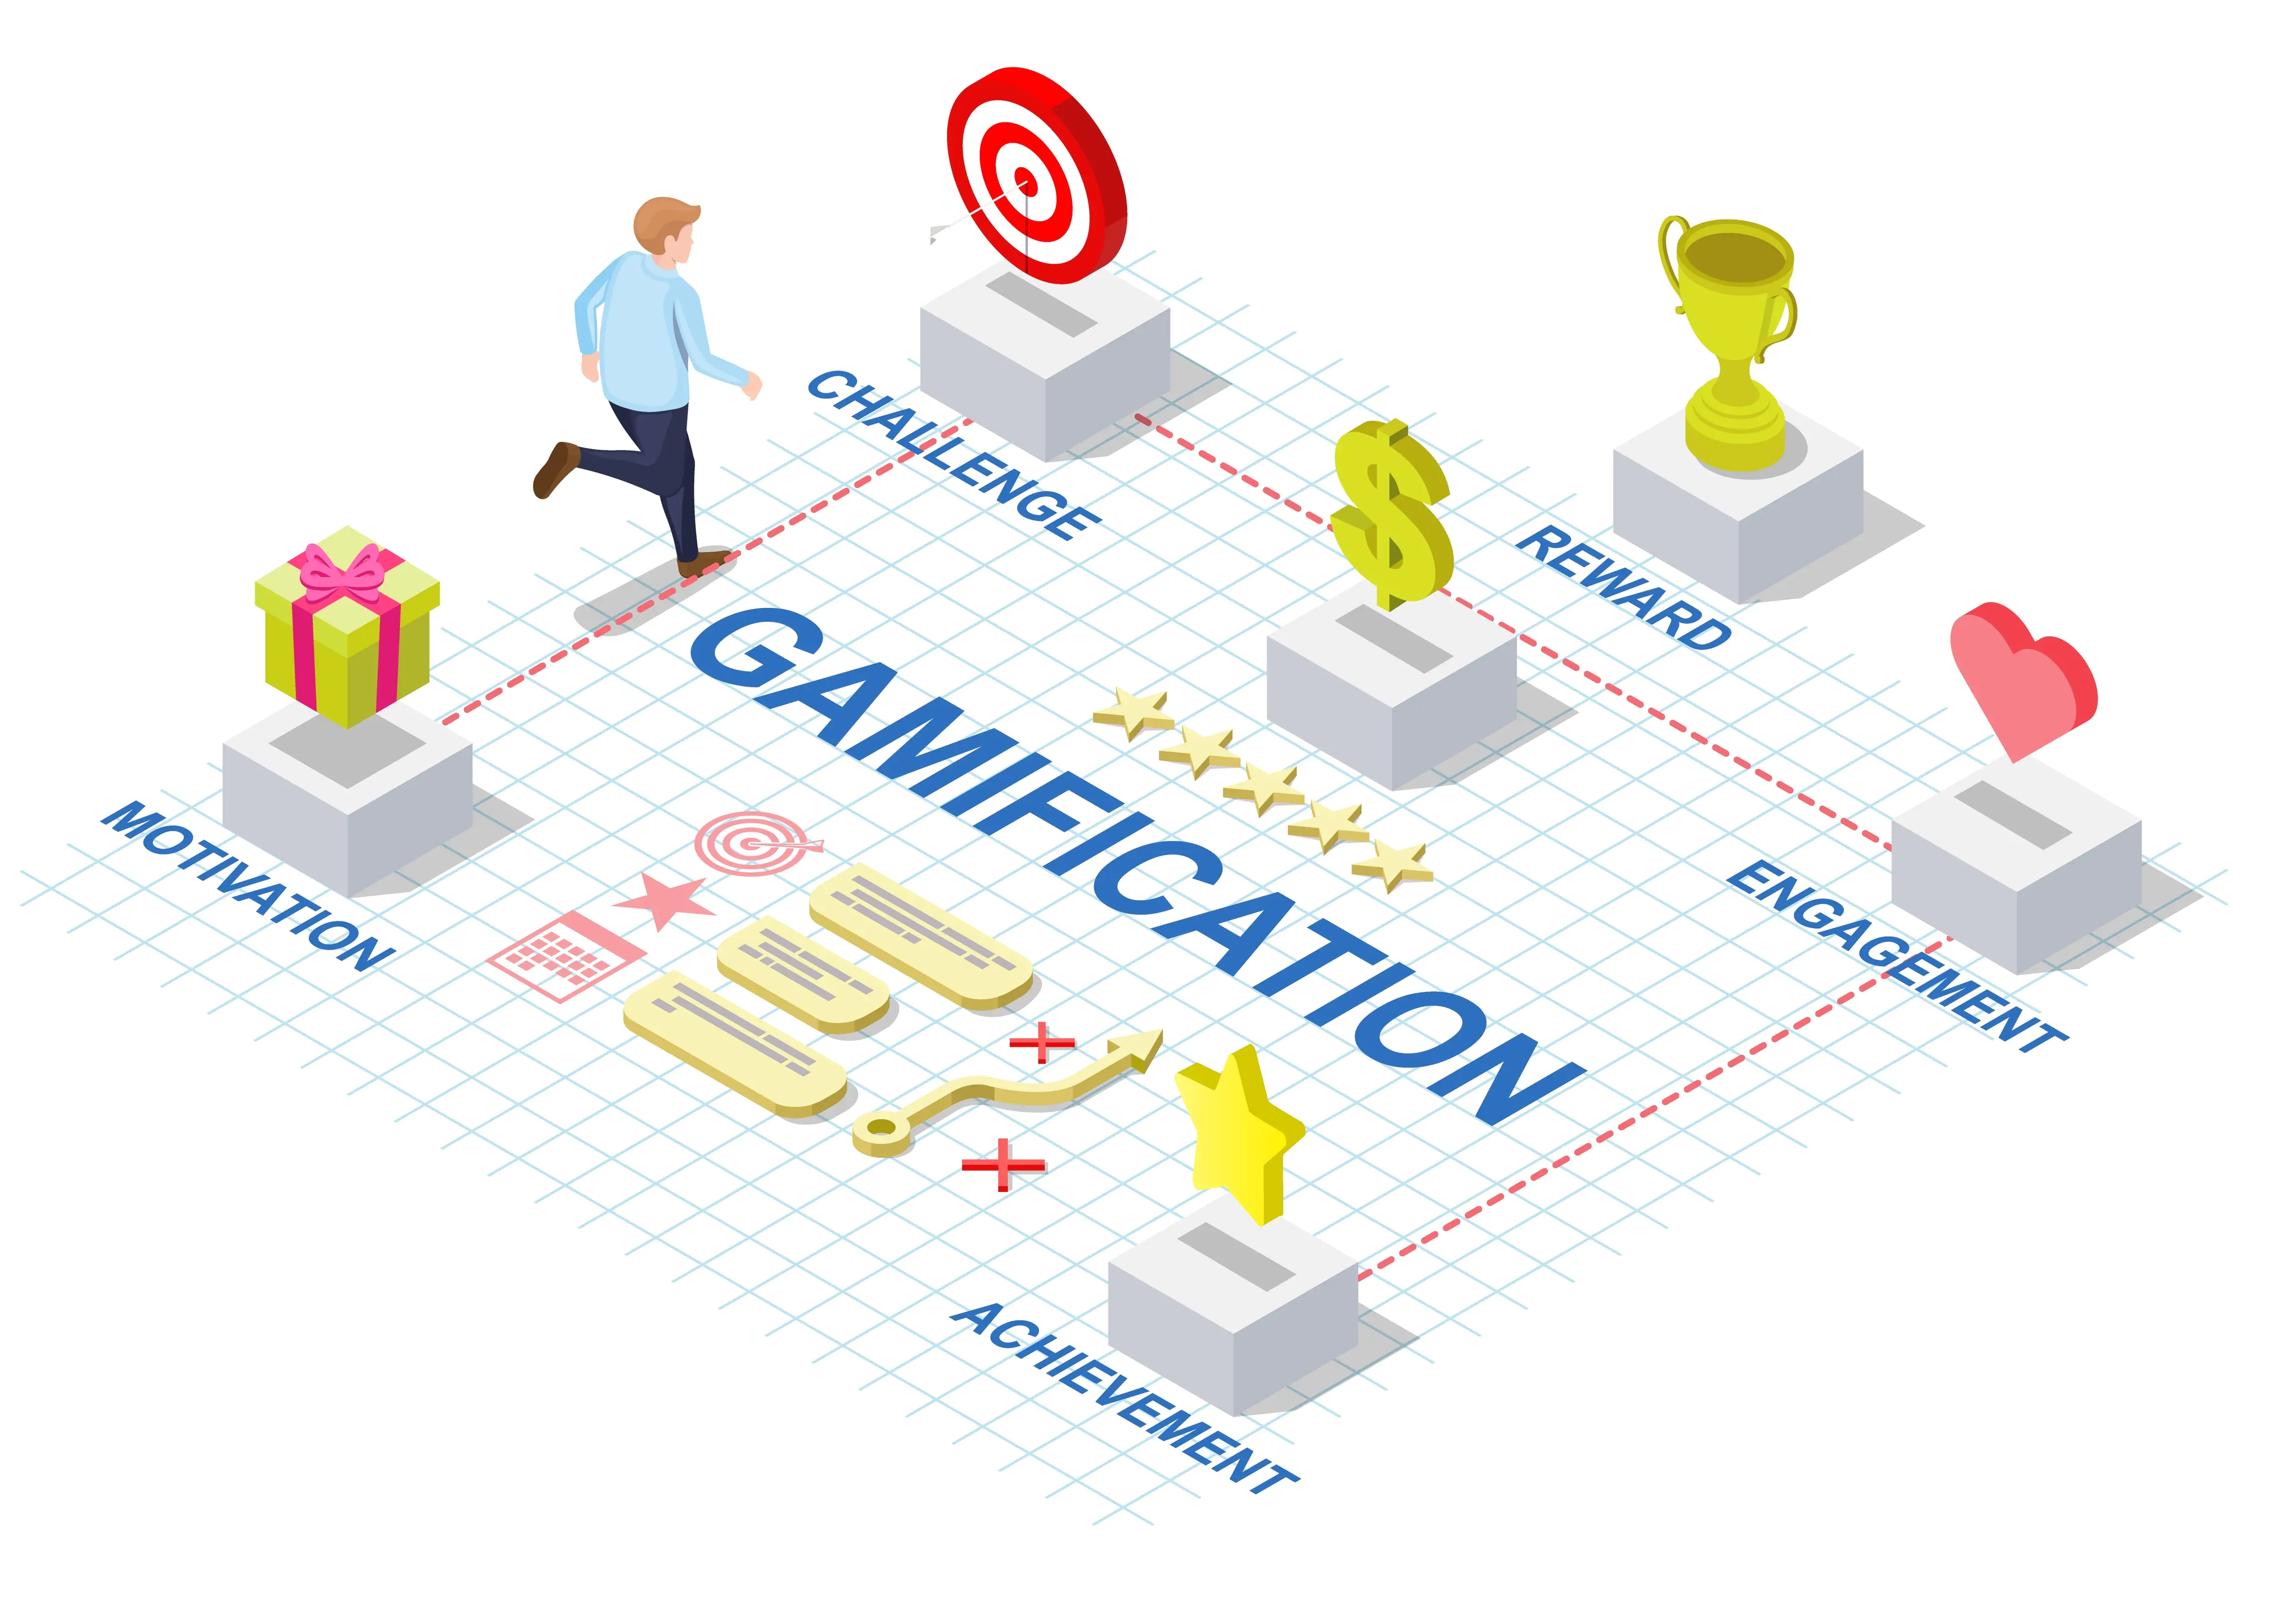 Use Gamification